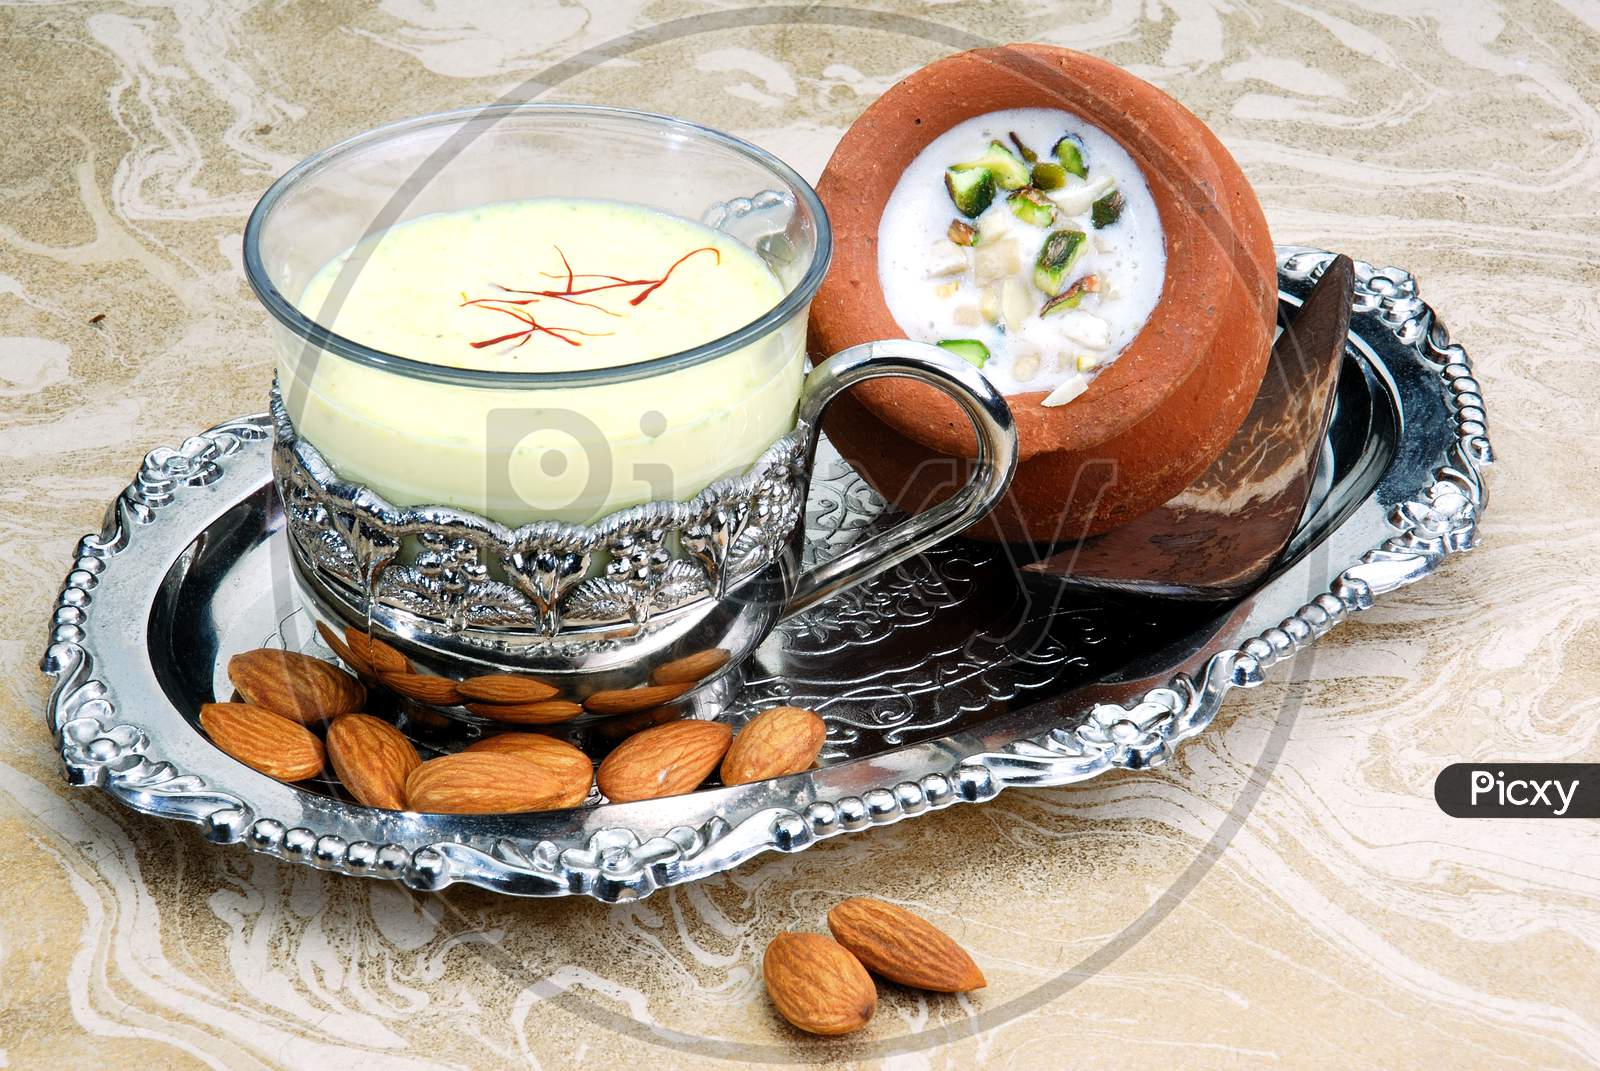 Indian Sweet Dessert or Sweet Condensed Milk With Saffron And Nuts